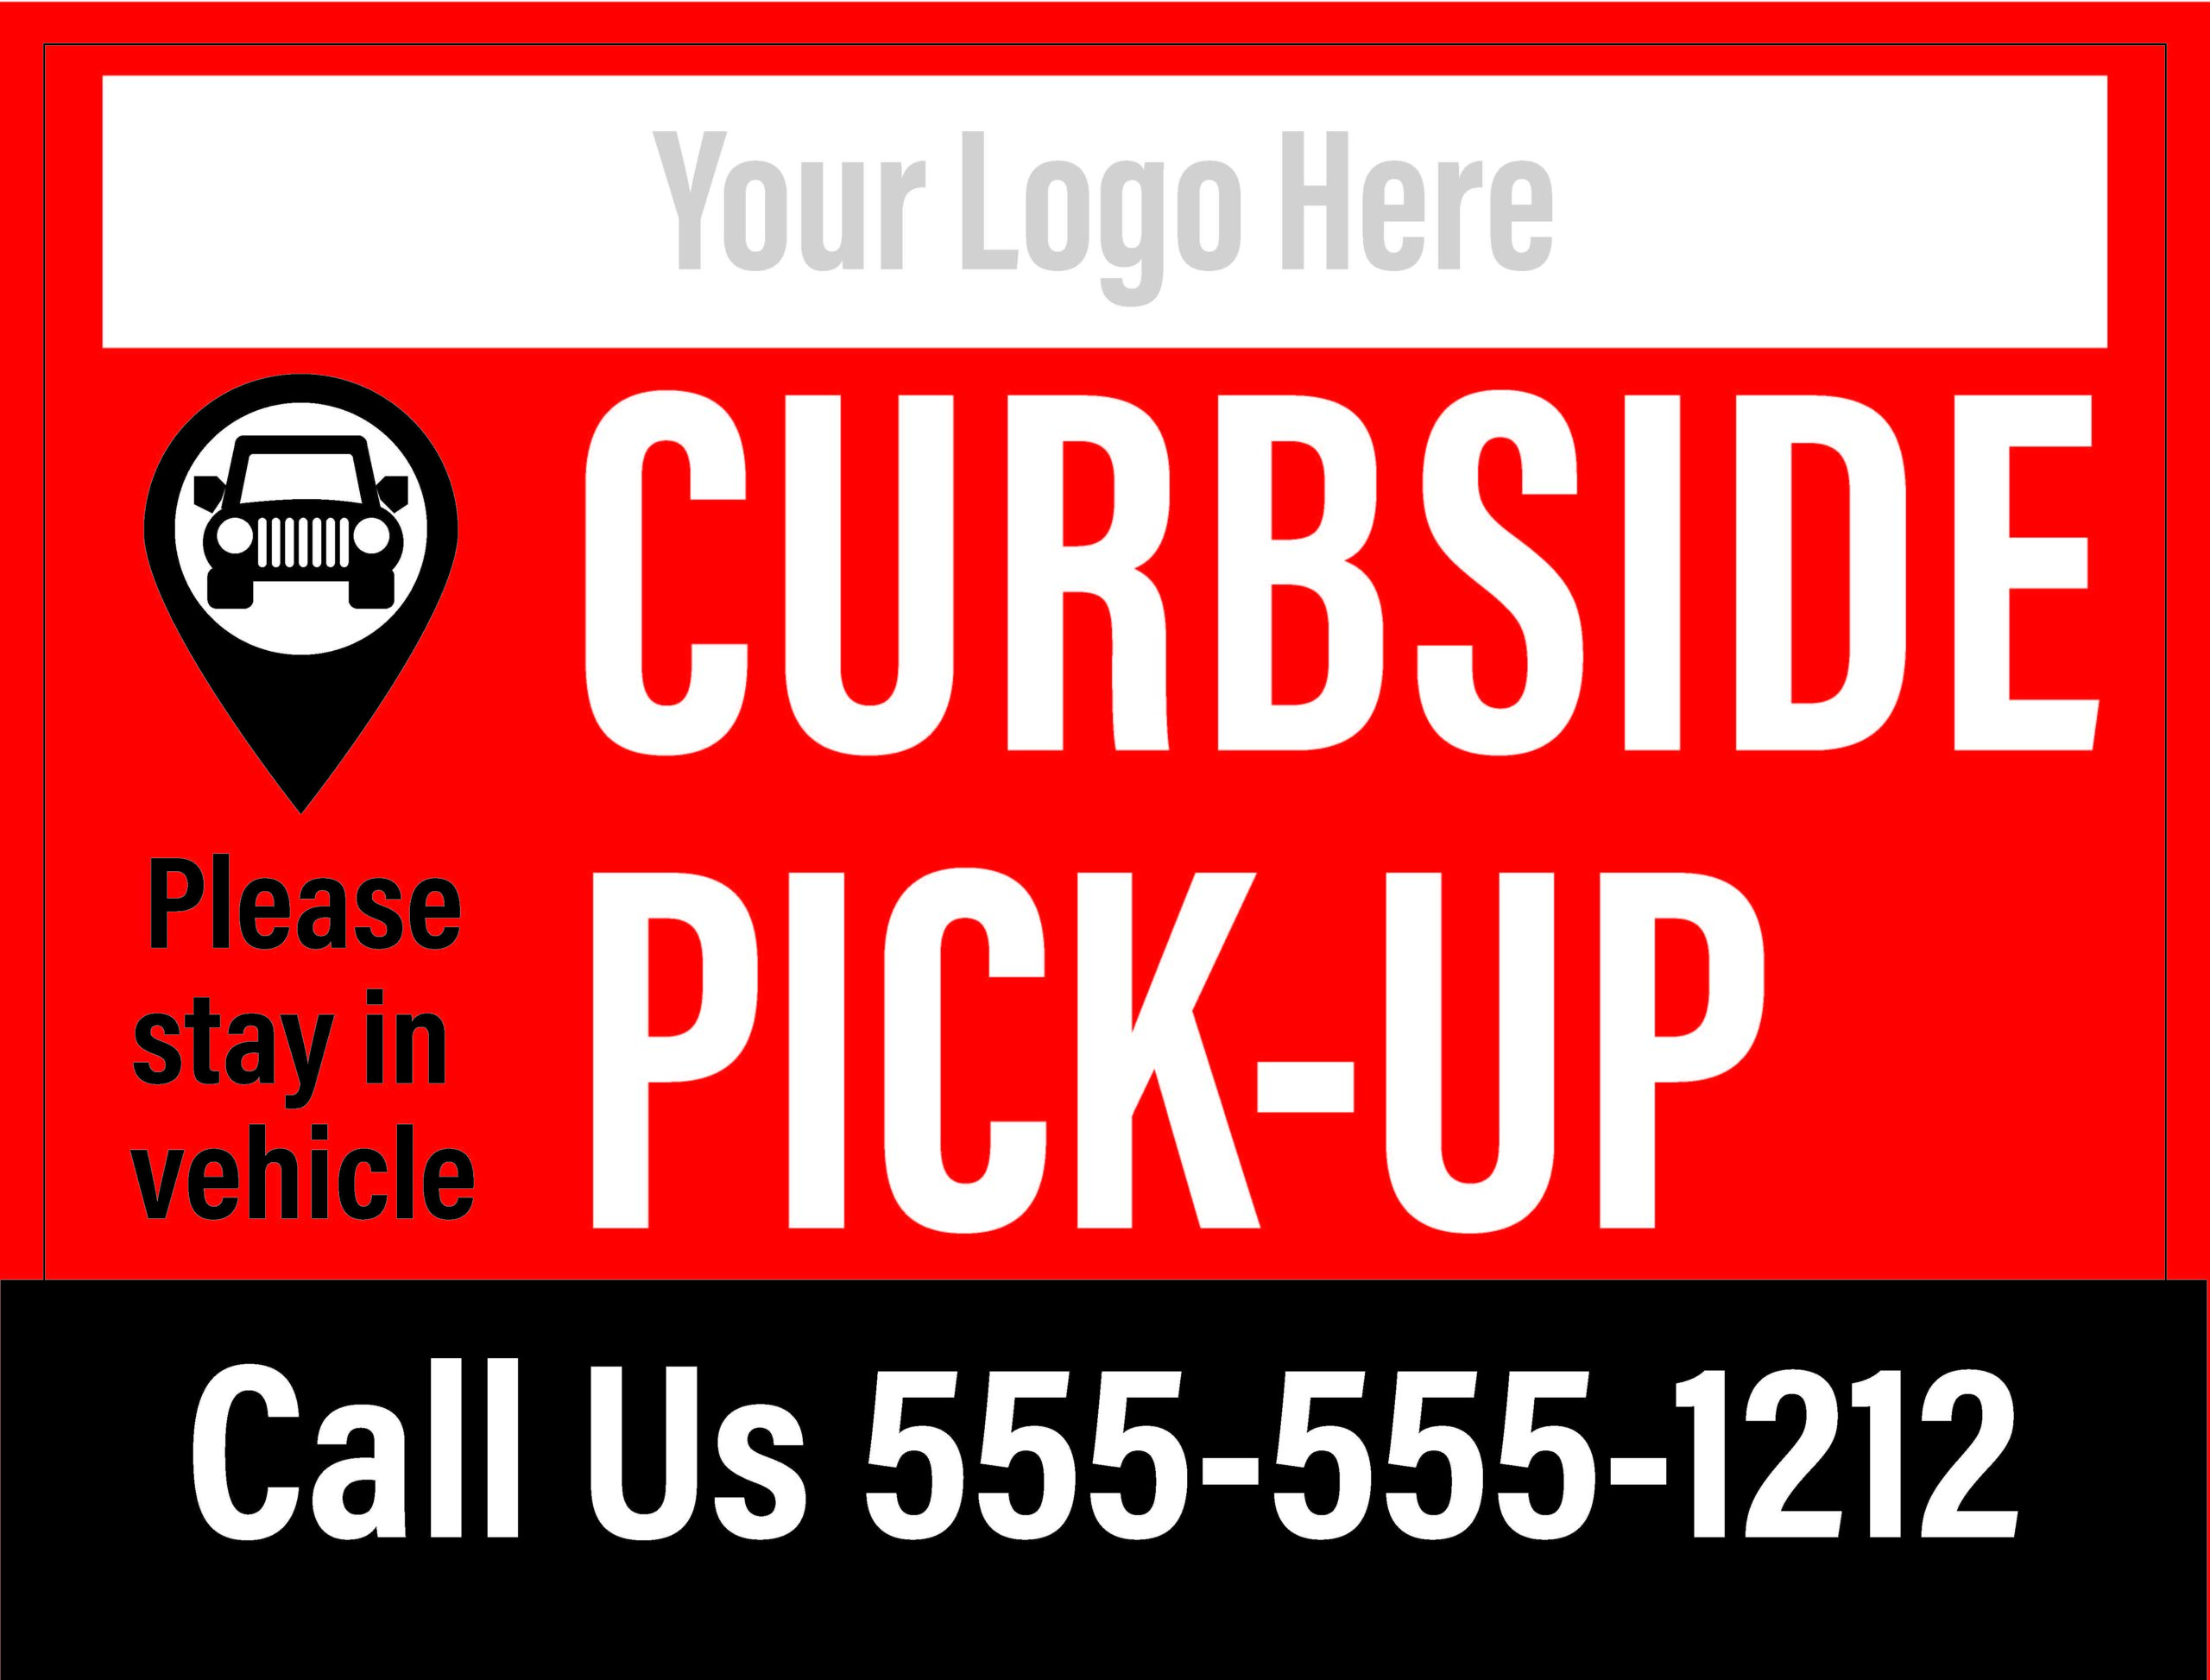 Curbside Pickup Signs 24”x 18” on white corrugated plastic with metal stand(red stay in vehicle) — 2 pack